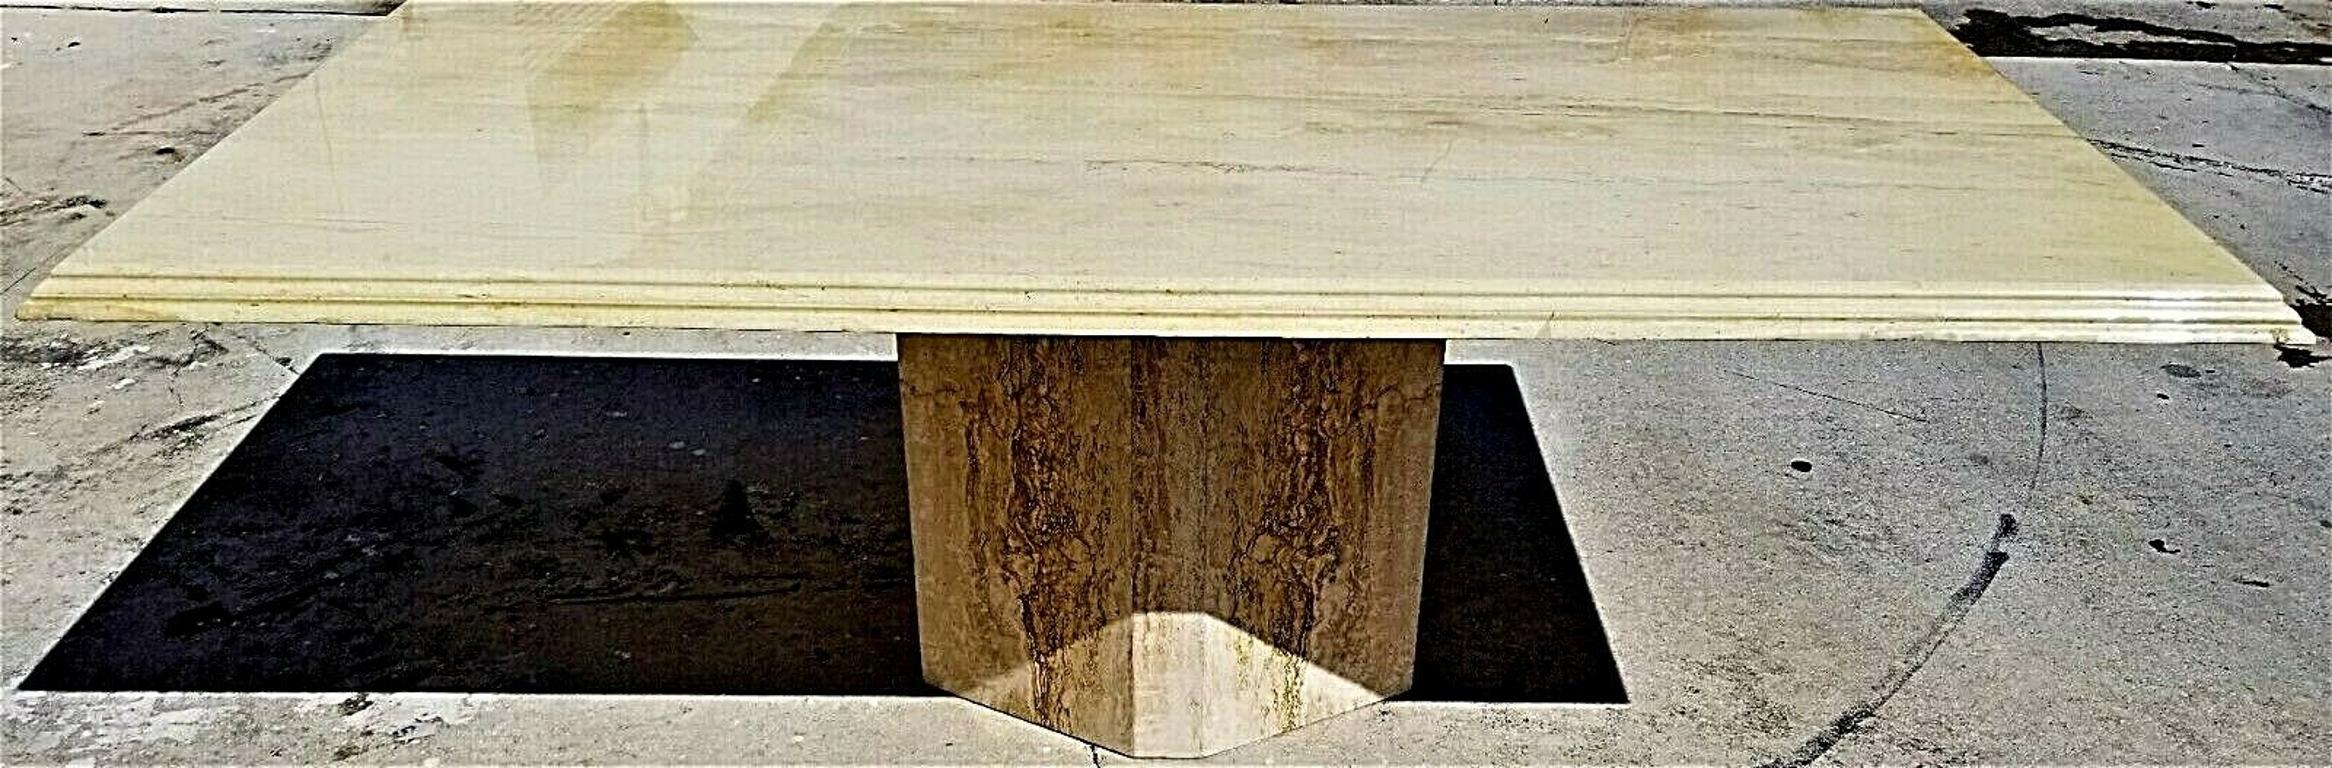 Offering one of our recent Palm Beach estate fine furniture acquisitions of a large mid century modern vintage polished travertine Italian marble dining table with ello base with brass supports.
Approximate measurements in inches
28 3/4